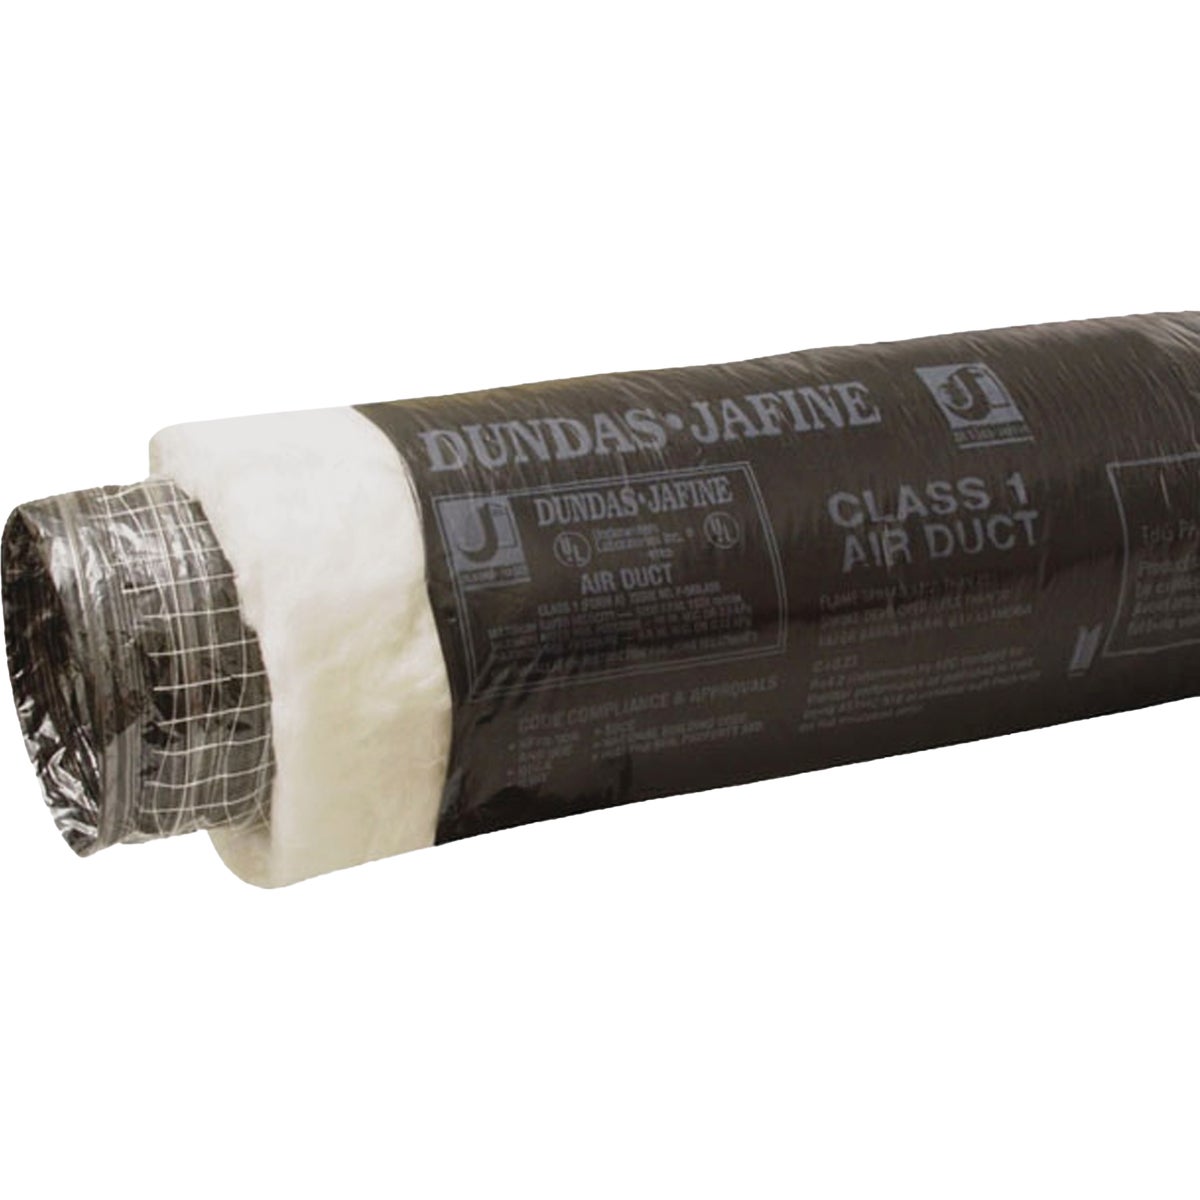 Dundas Jafine 8 In. I.D. x 25 Ft. R6.0 Black Jacket Flexible Insulated Ducting